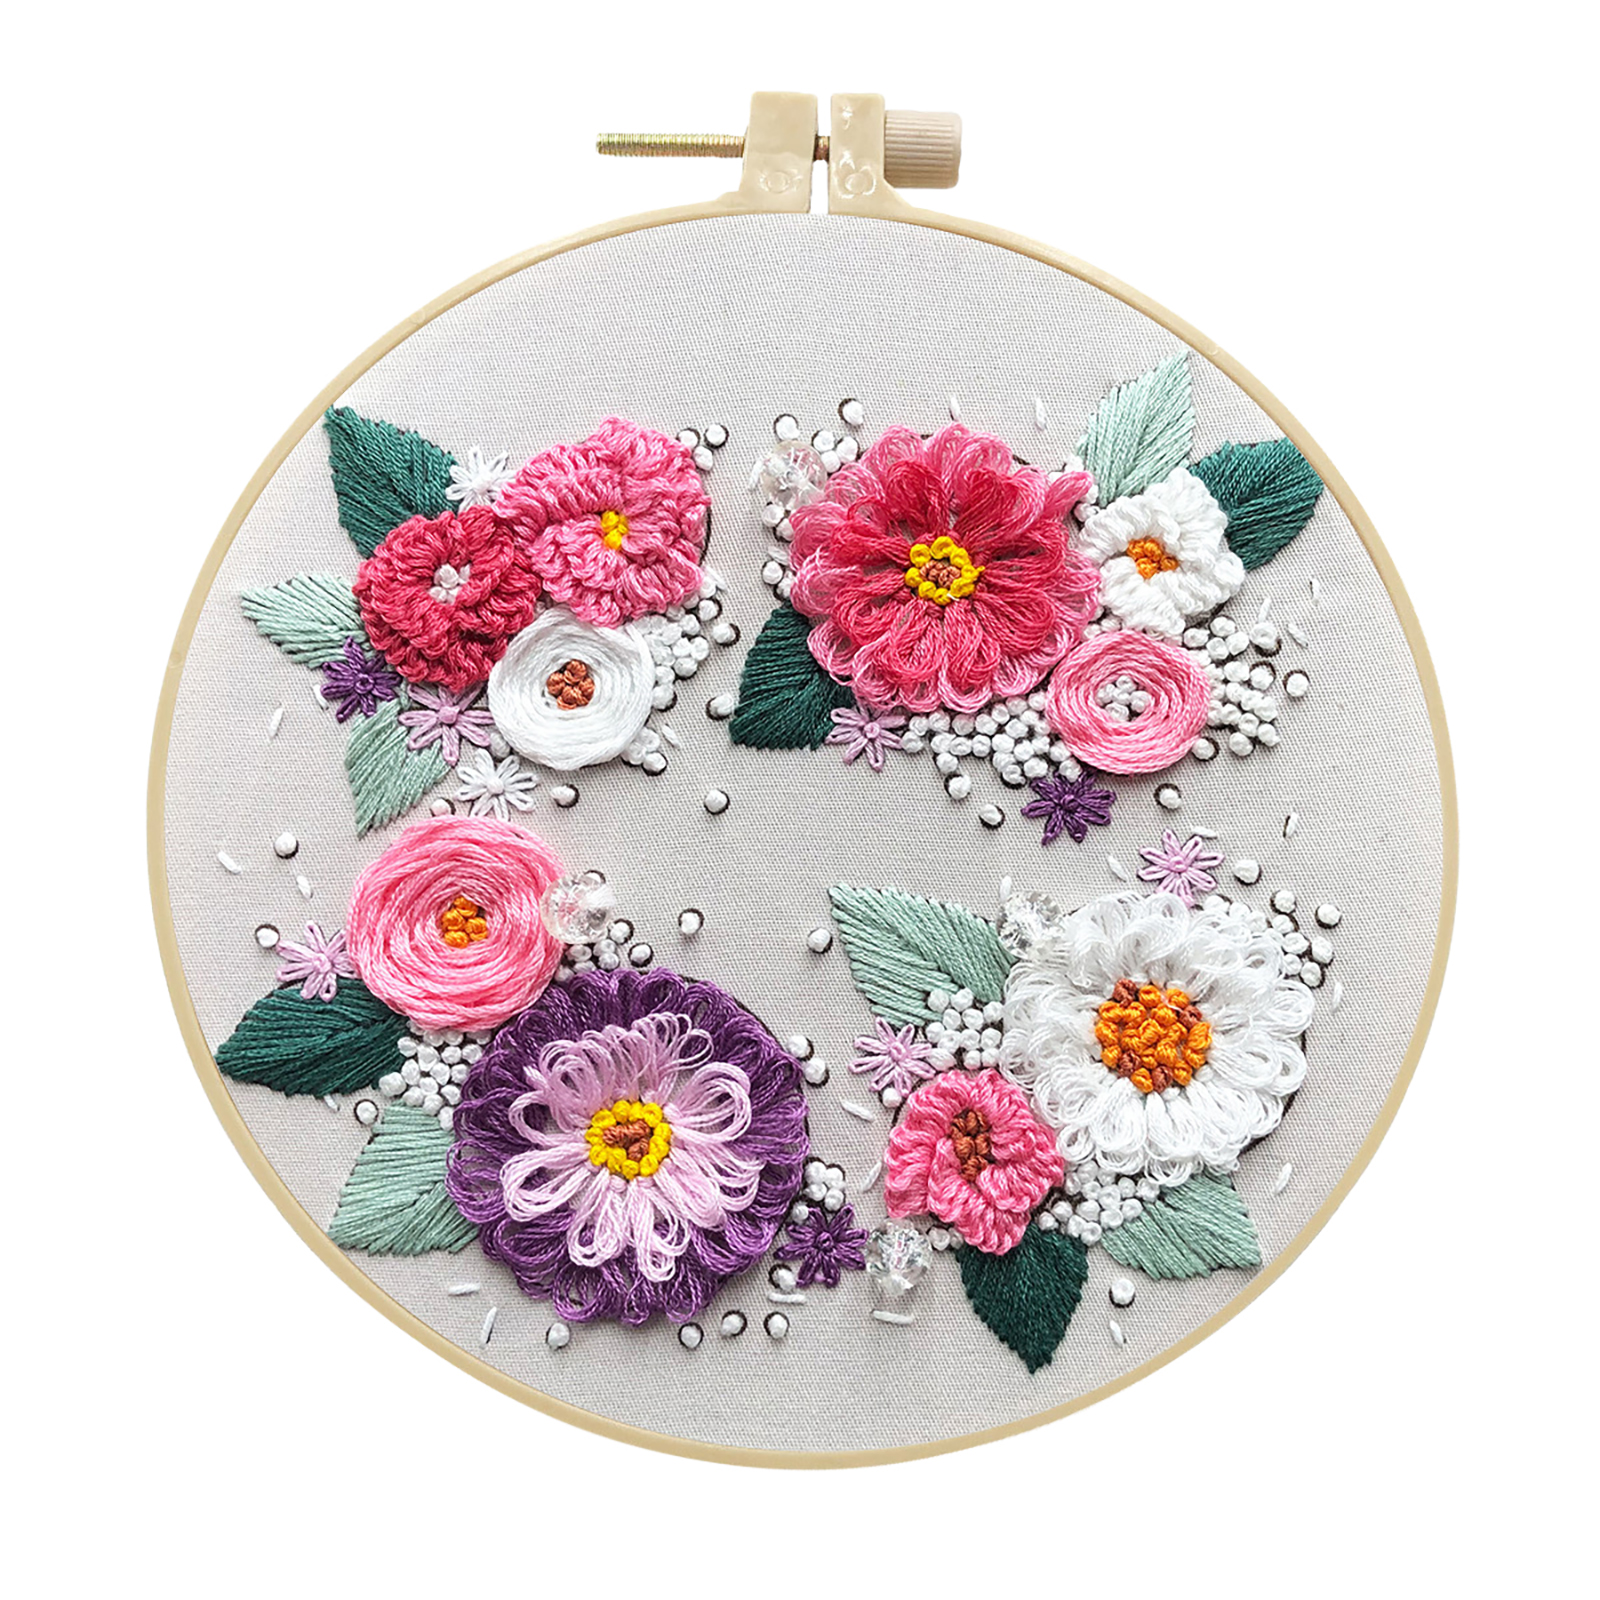 Embroidery Kits Cross stitch kits for Adult Beginner - Blooming flowers Pattern